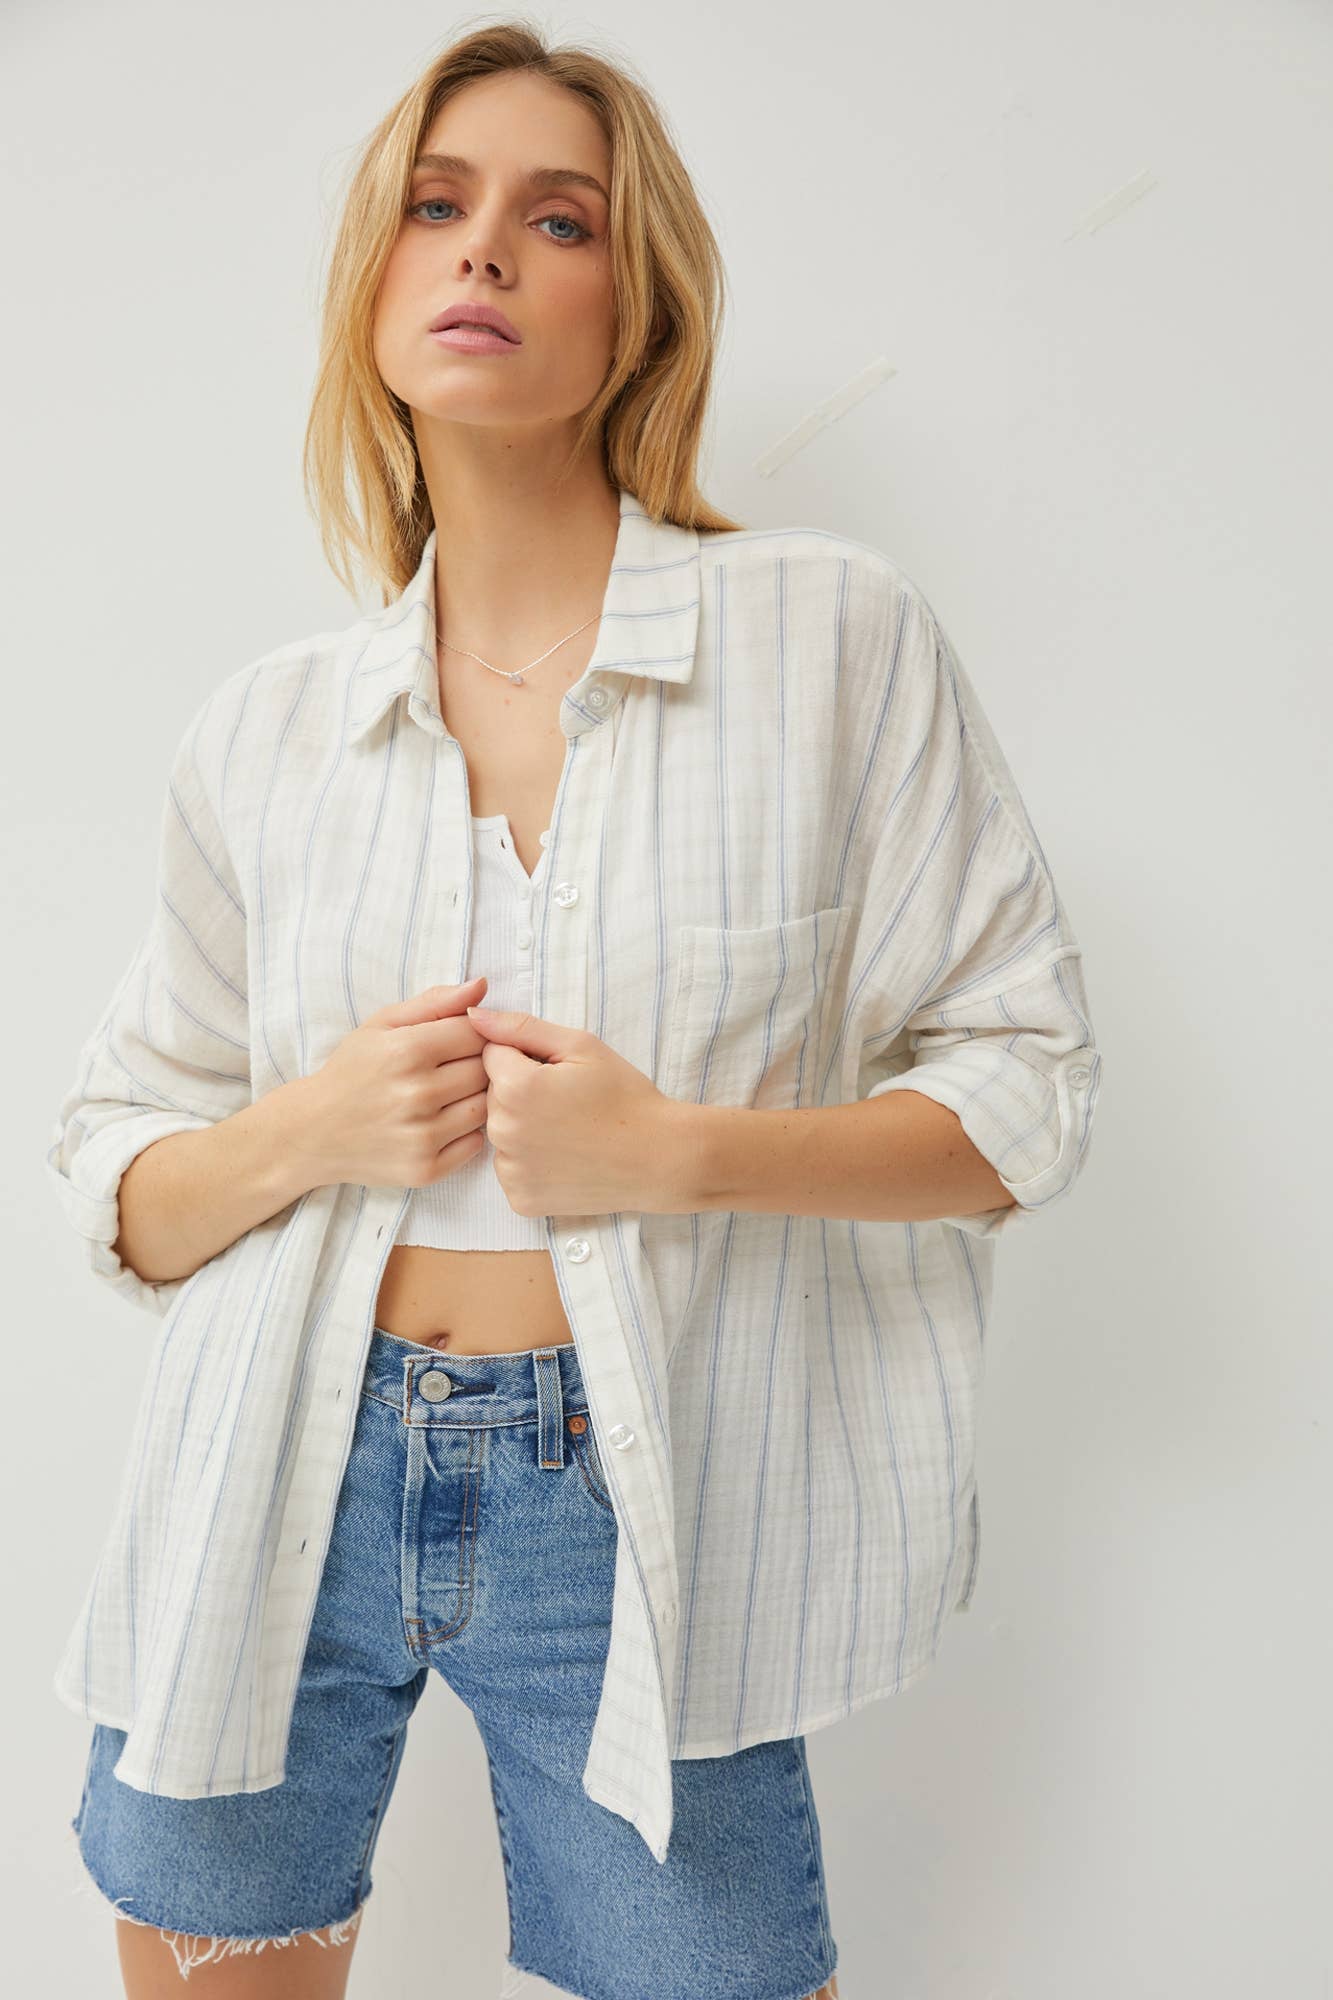 Washed Away Top - 120 Long Sleeve Tops